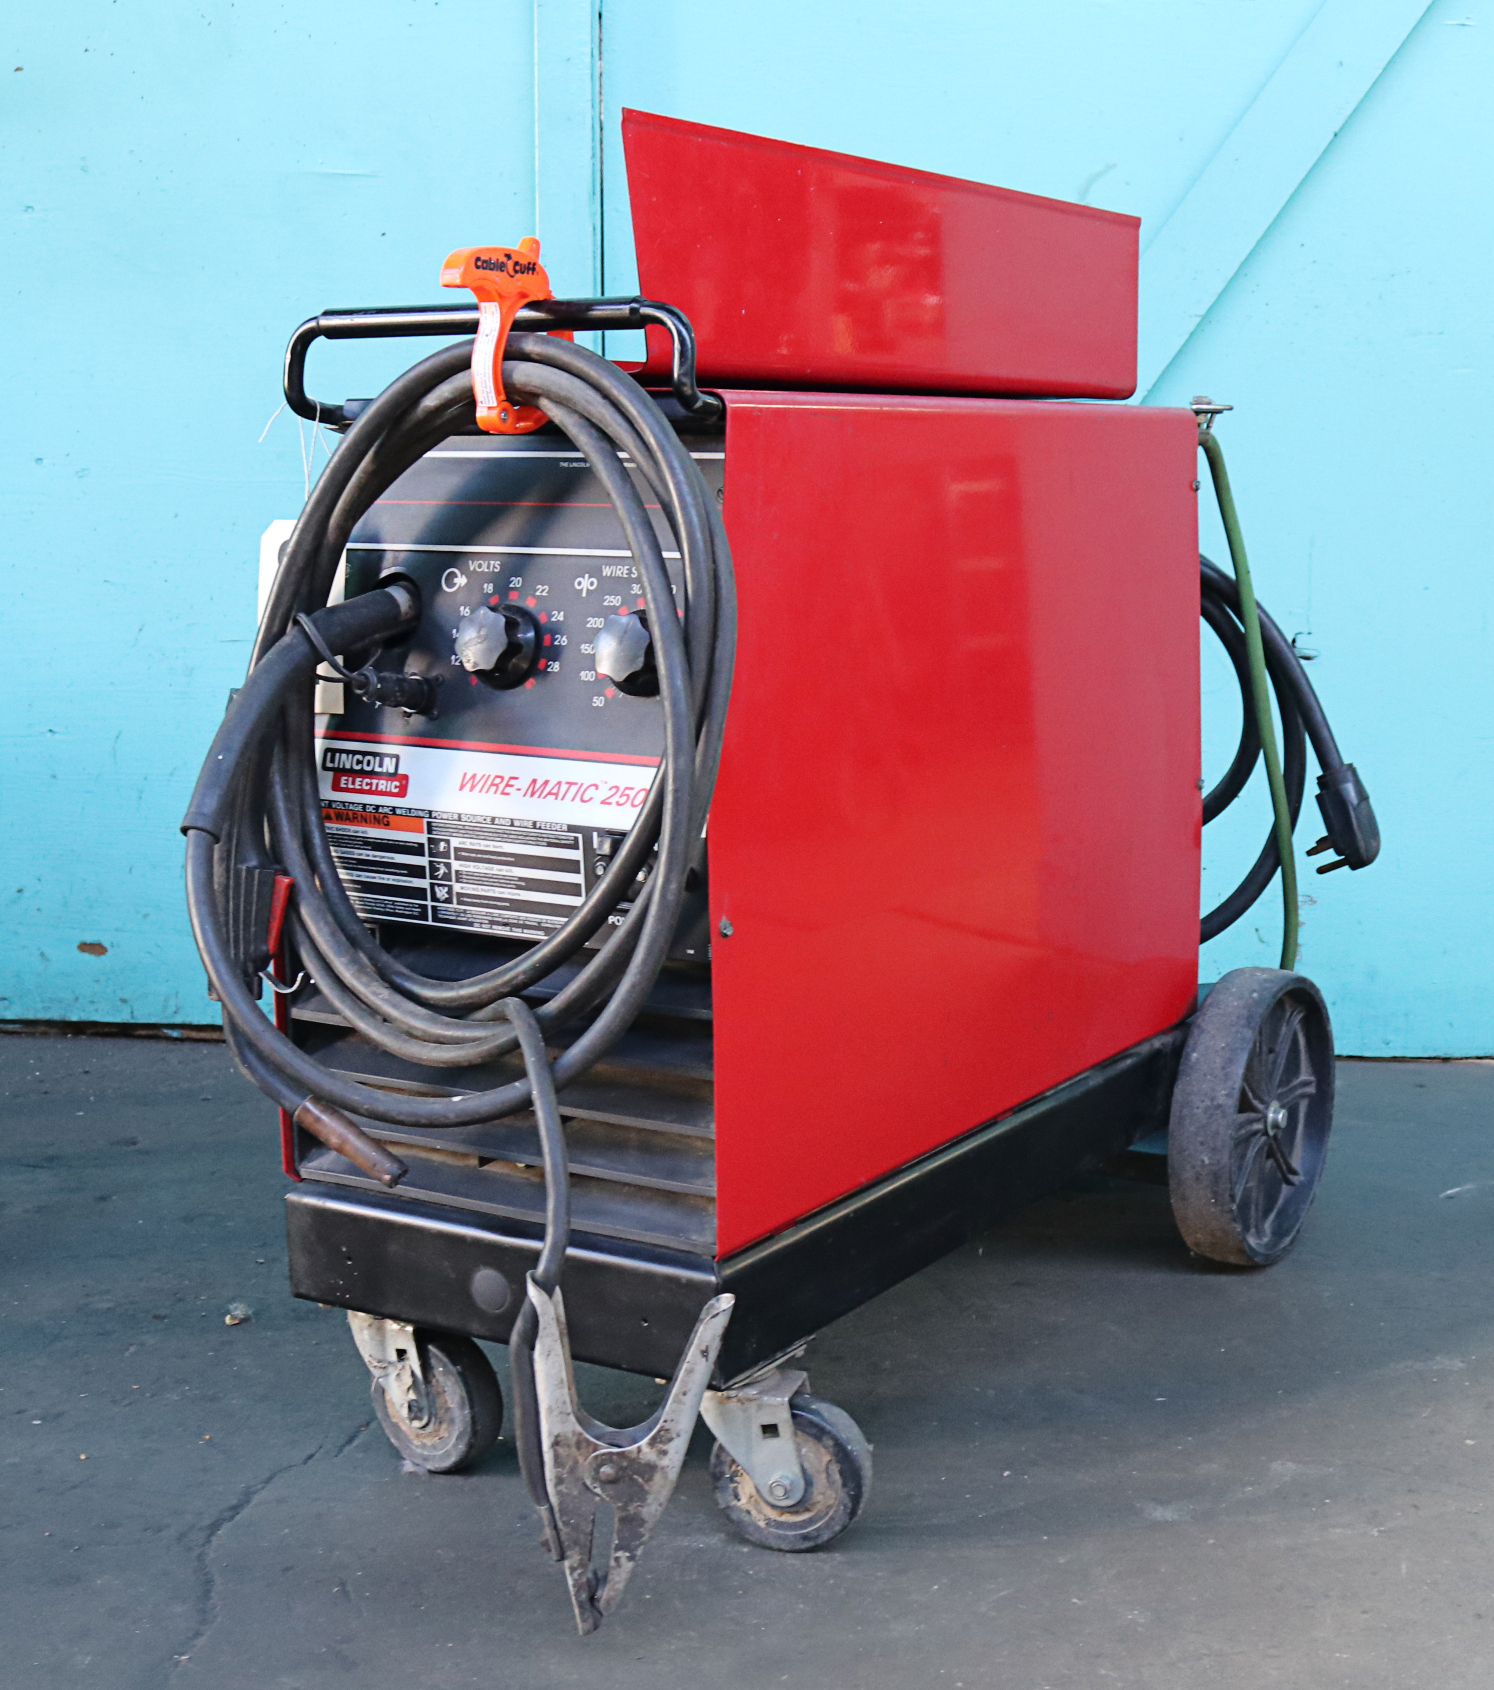 lincoln-wirematic-250-welder-norman-machine-tool